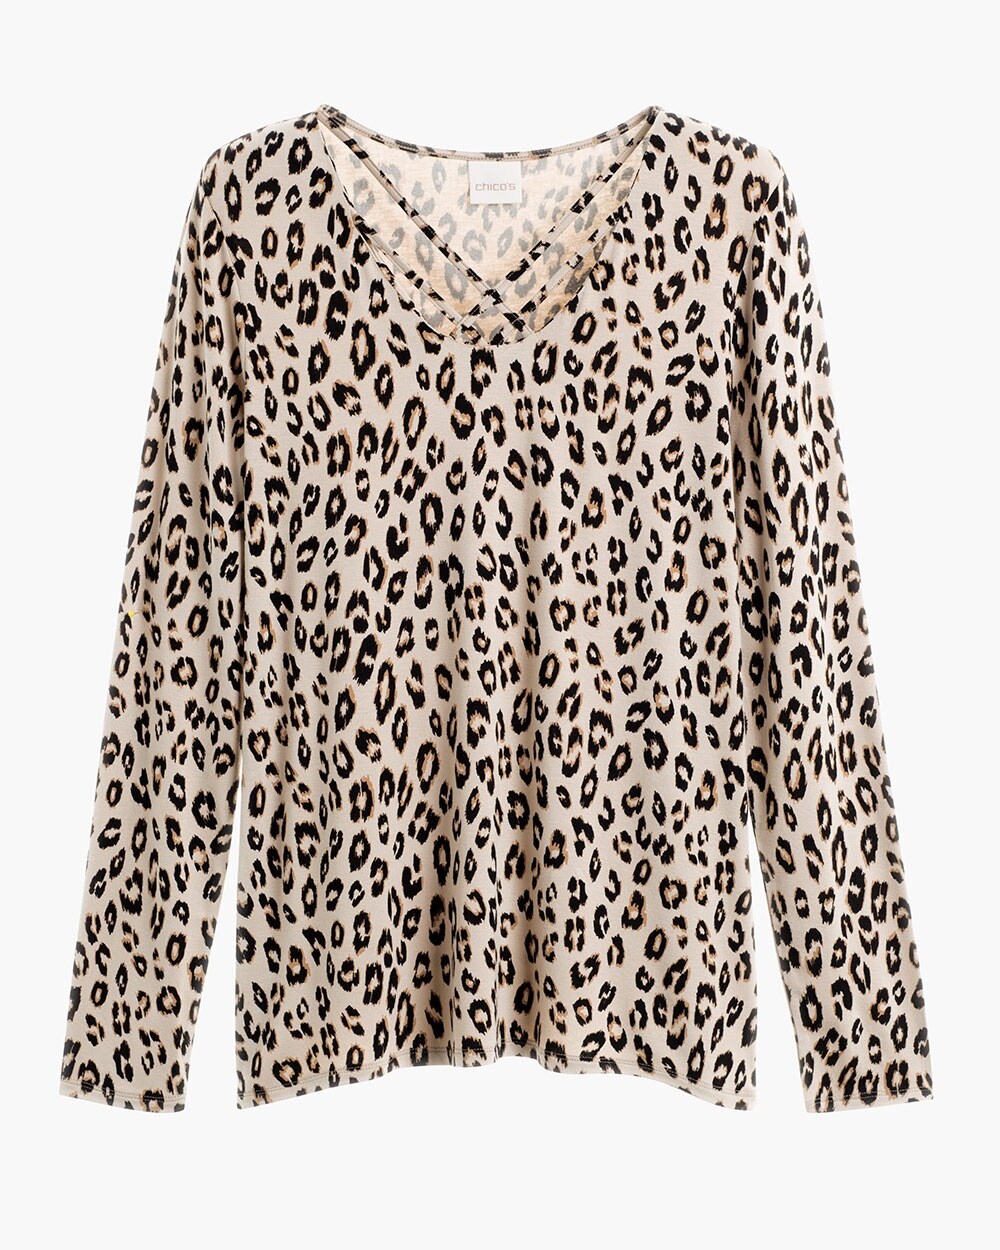 Layered Leopard Criss-Cross Top - Chico's